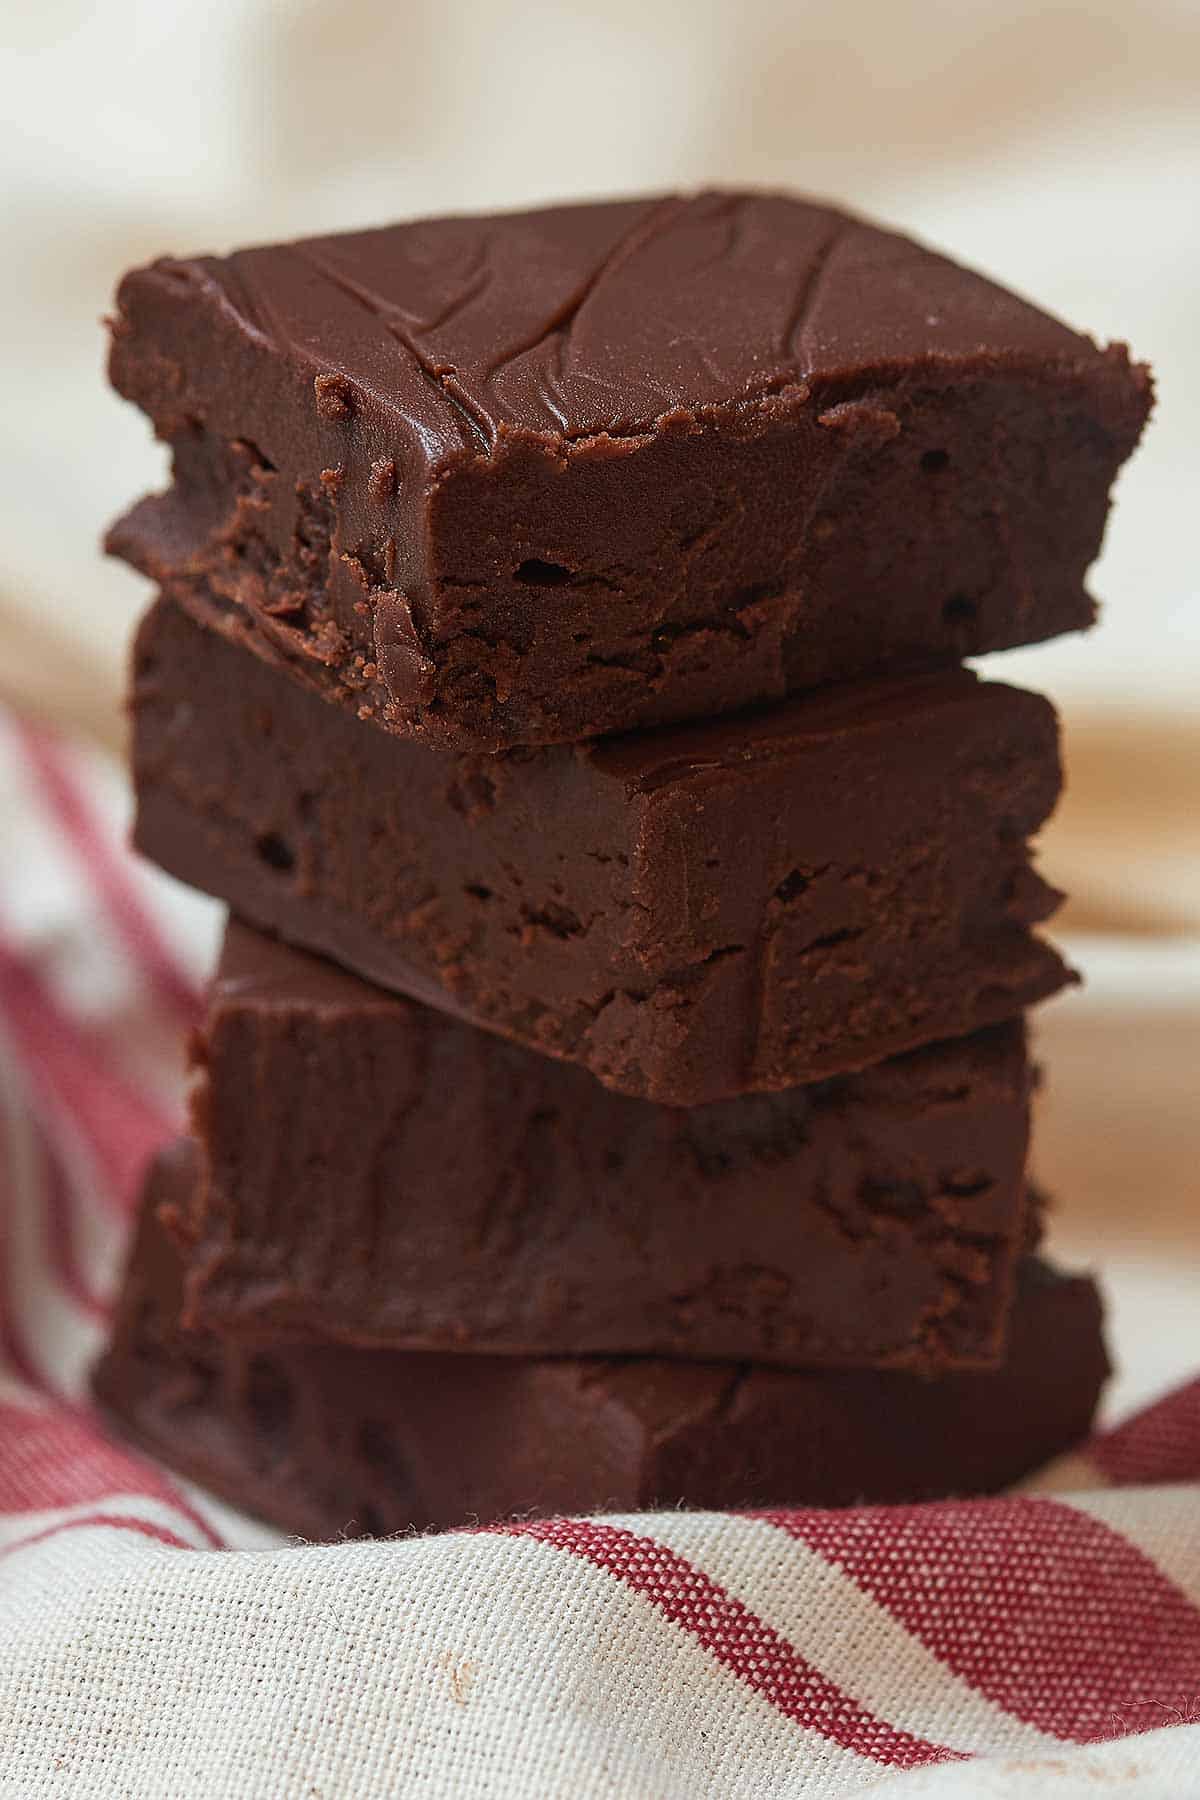 Four pieces of fudge, stacked